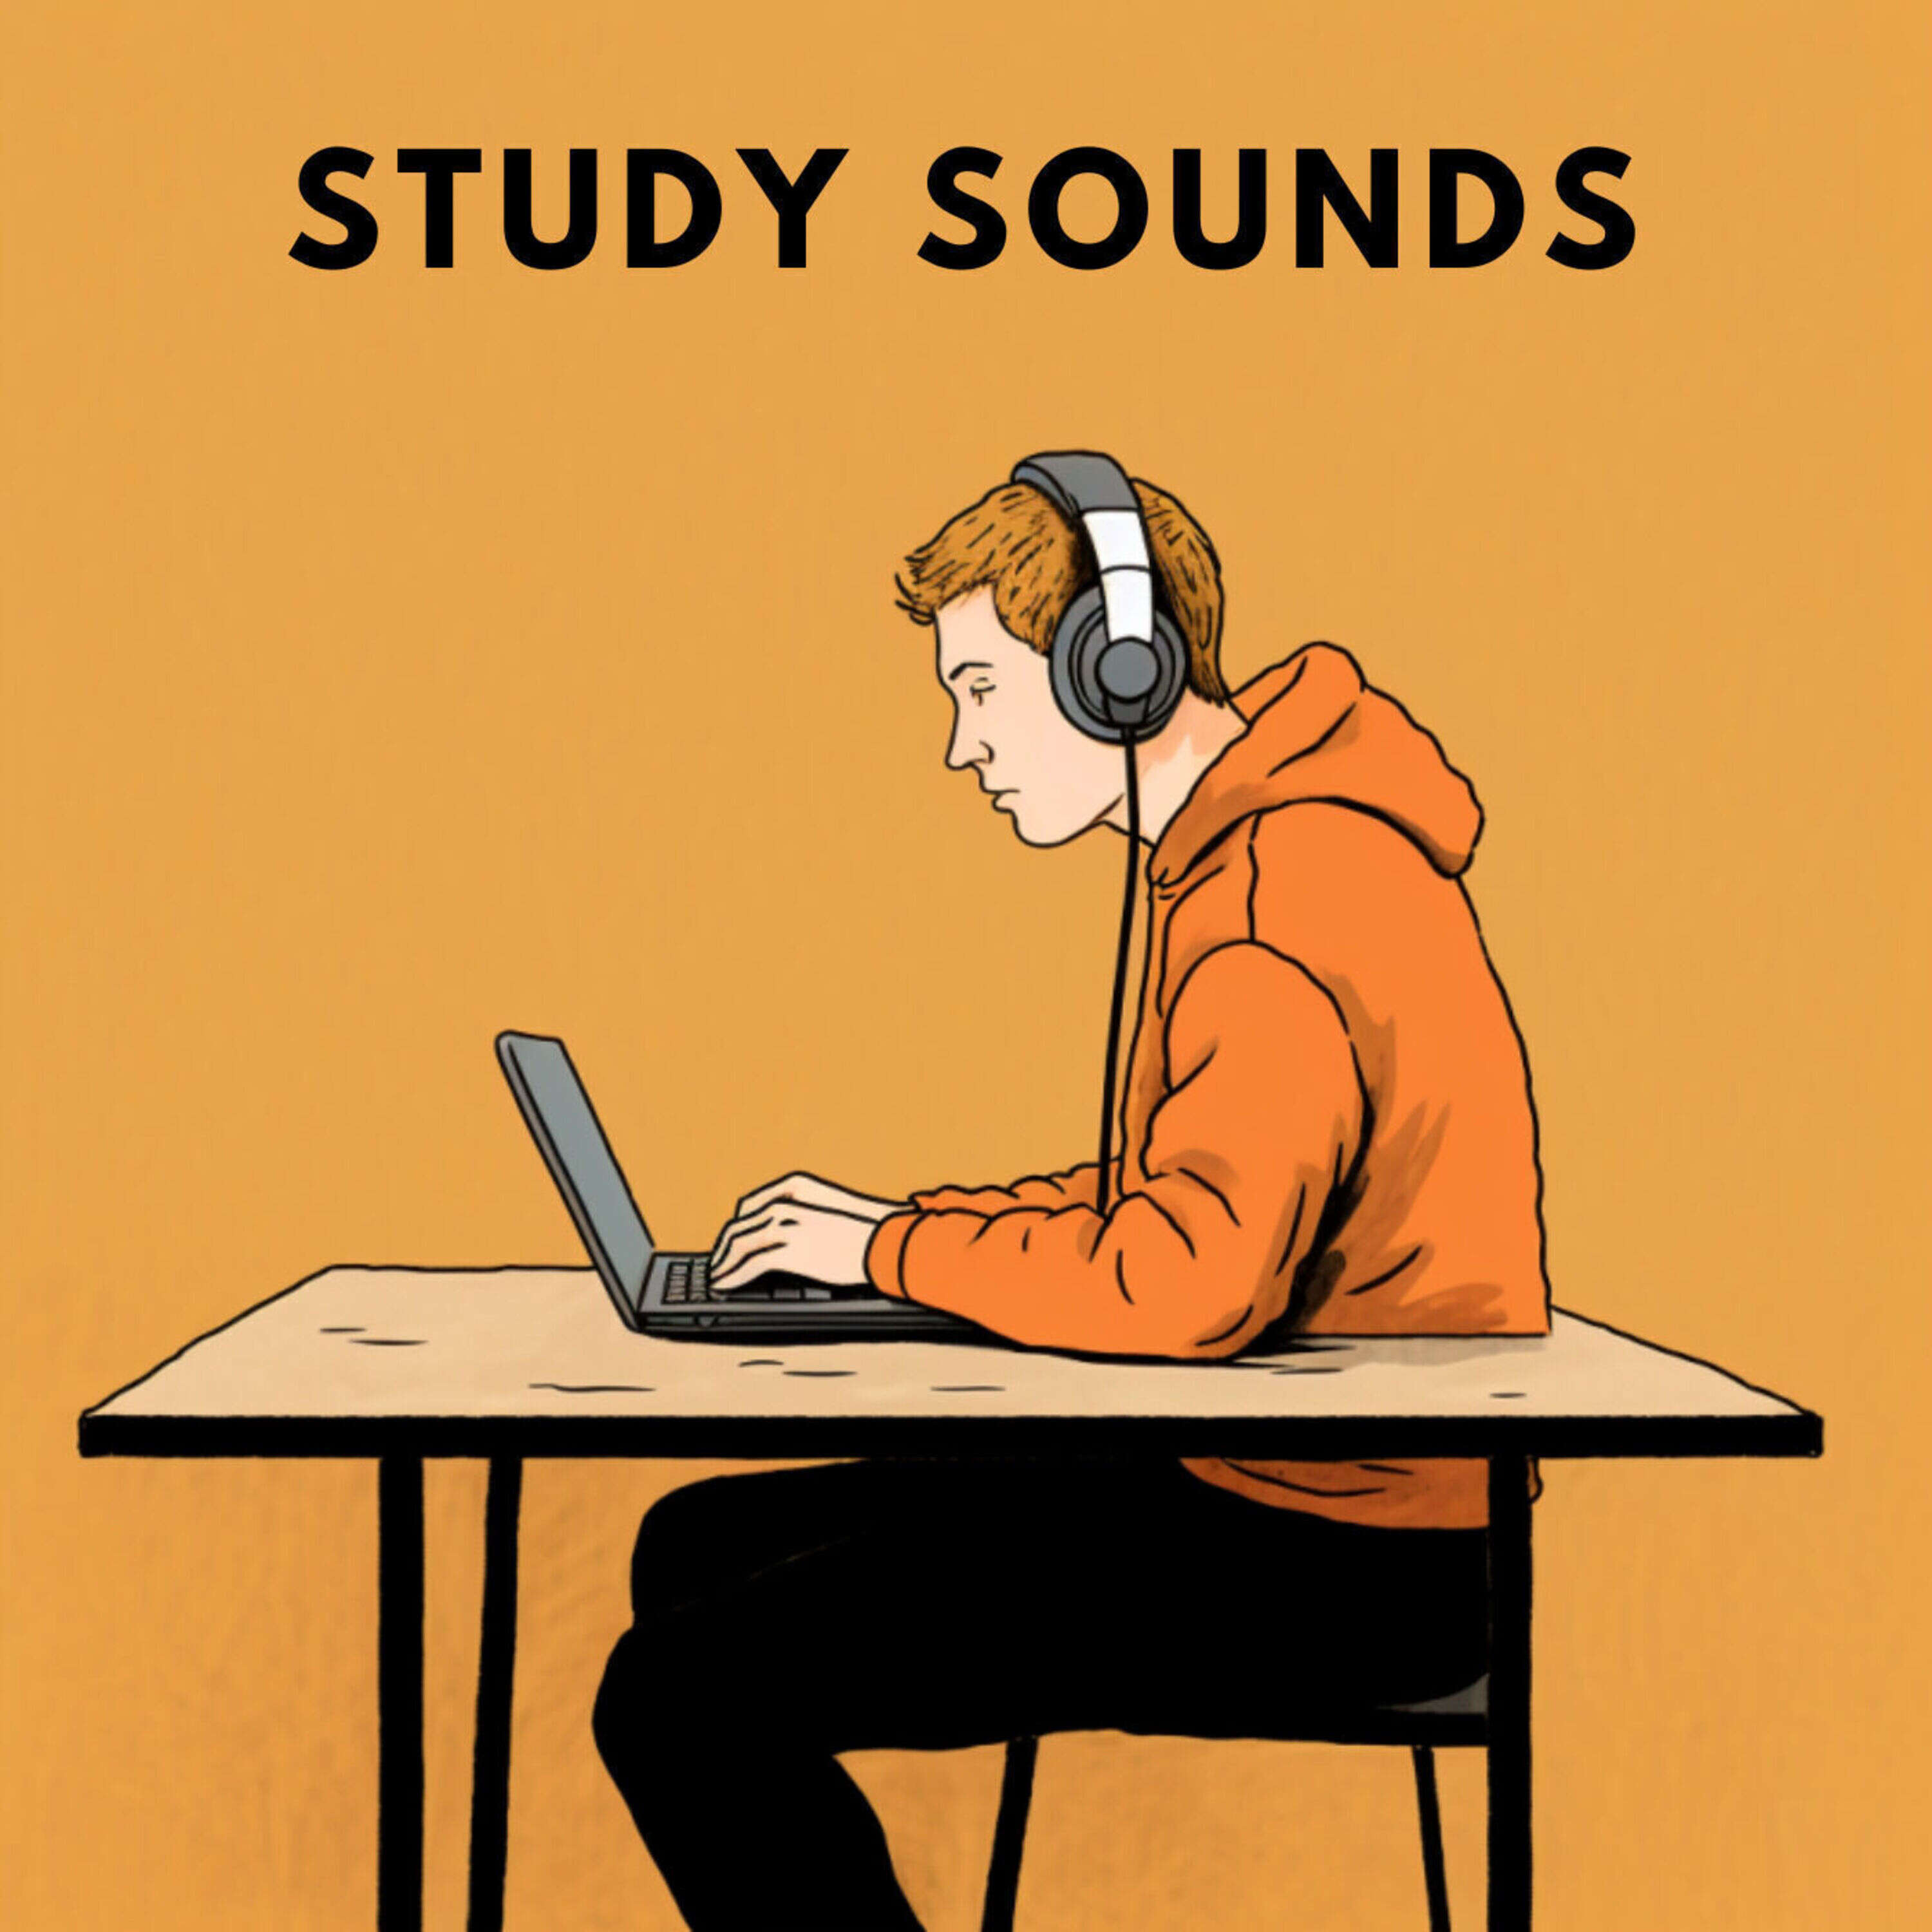 Deep Focus sounds: Boost Your Alertness and Concentration, Study sounds